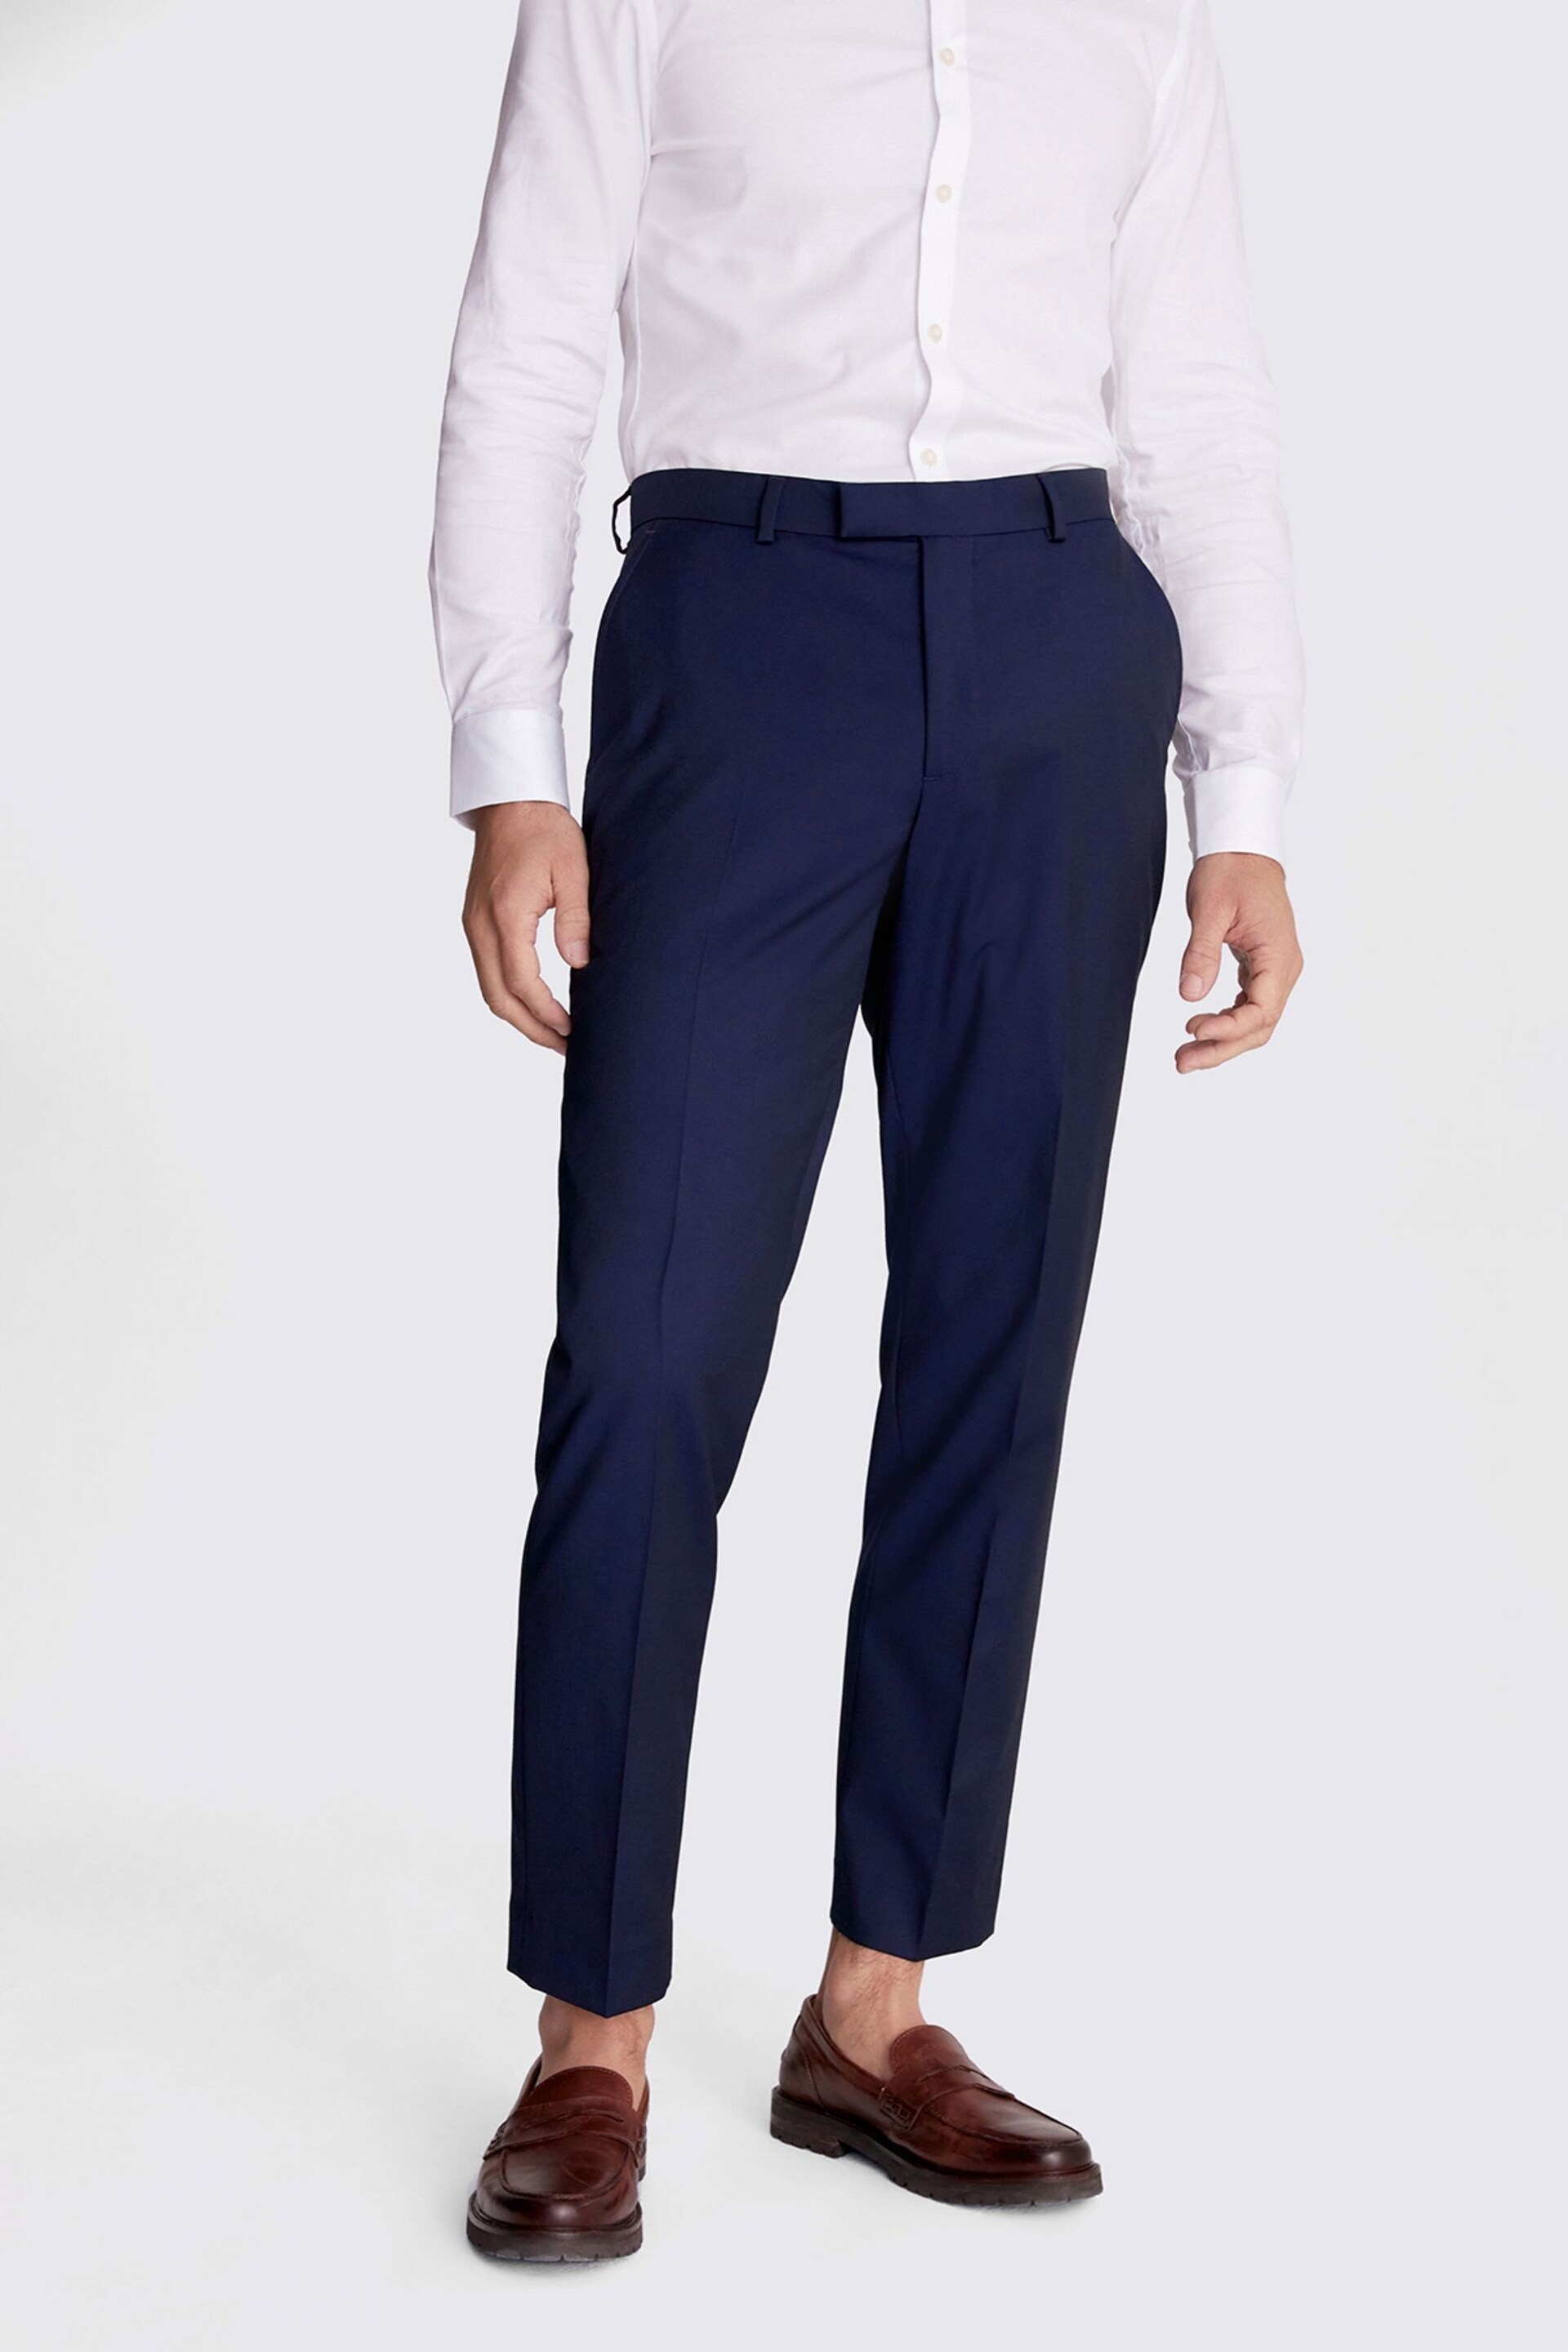 MOSS Ink Blue Stretch Suit: Trousers - Image 1 of 3